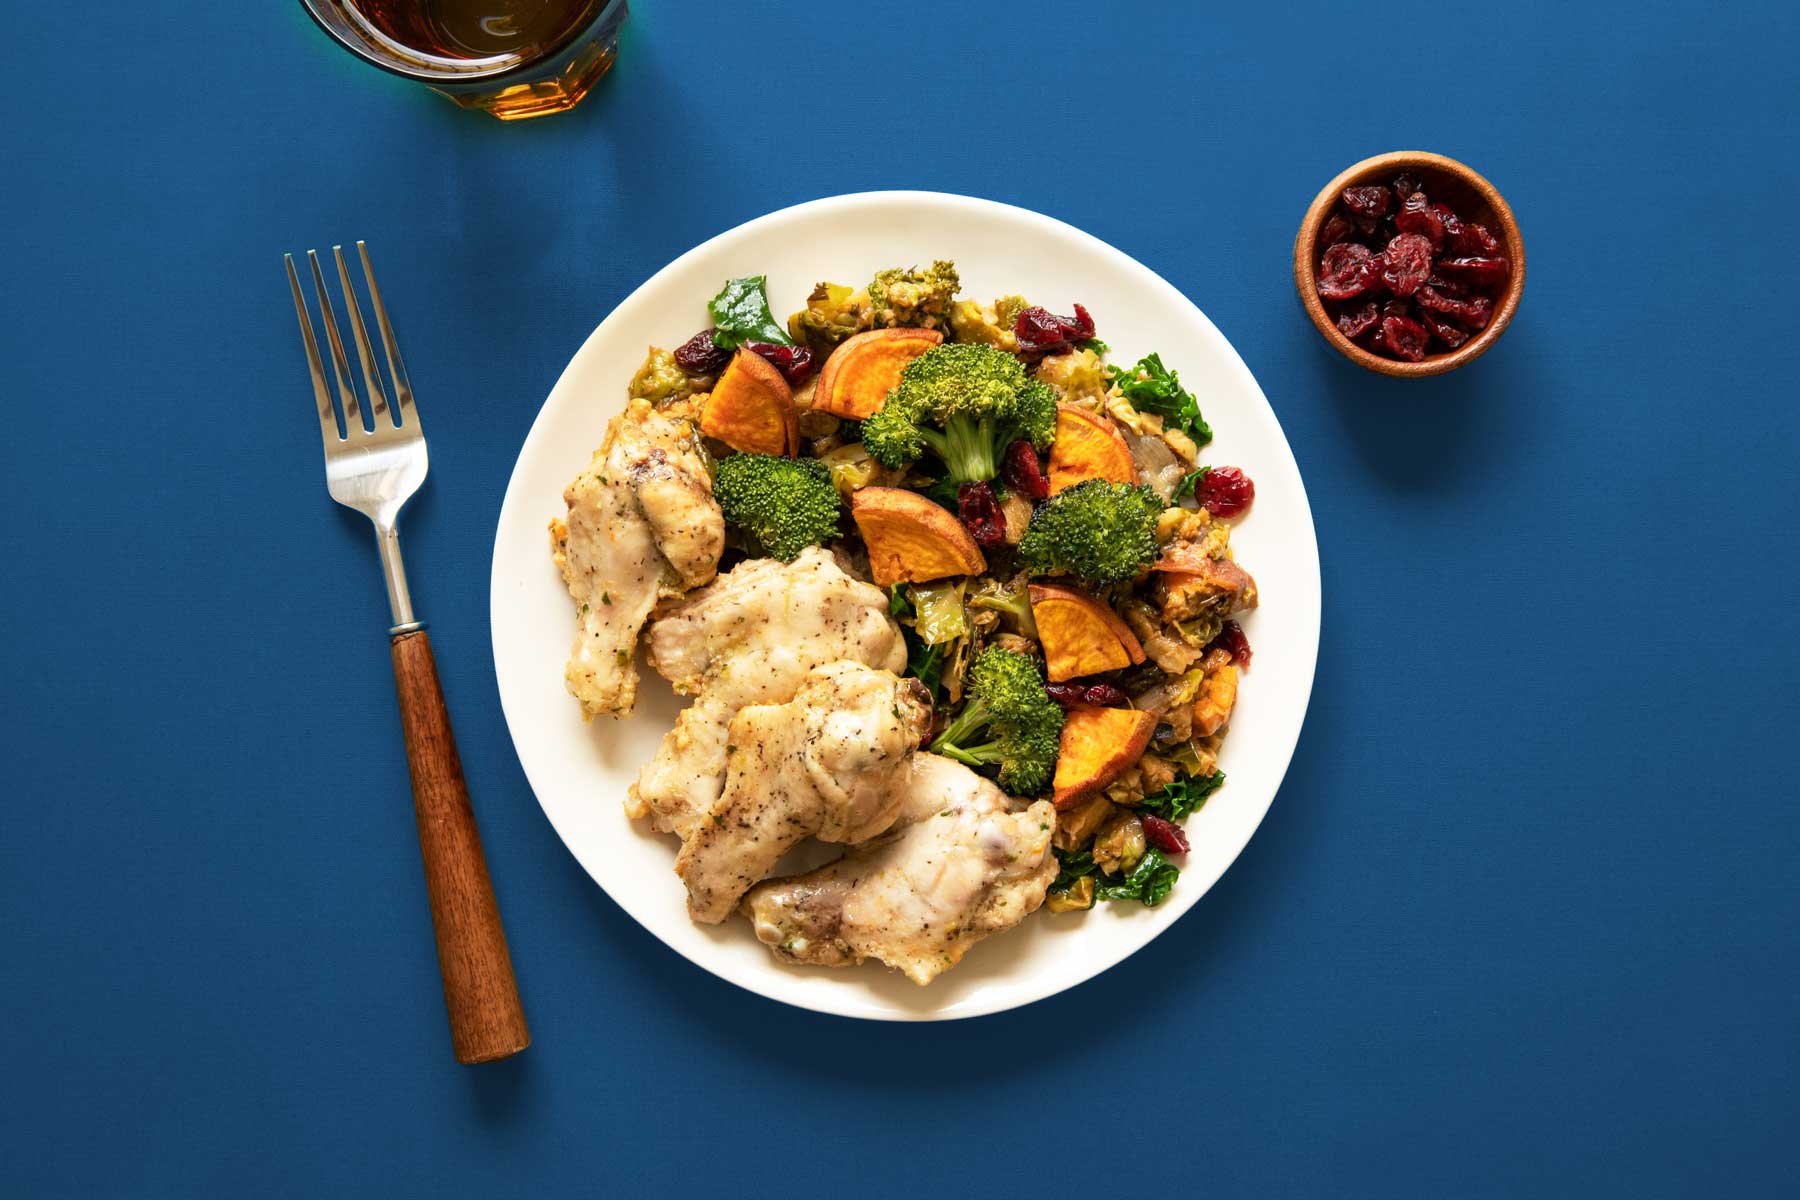 A plate of chicken with broccoli, sweet potatoes, and other vegetables. Photo by Ella Olsson on Unsplash.